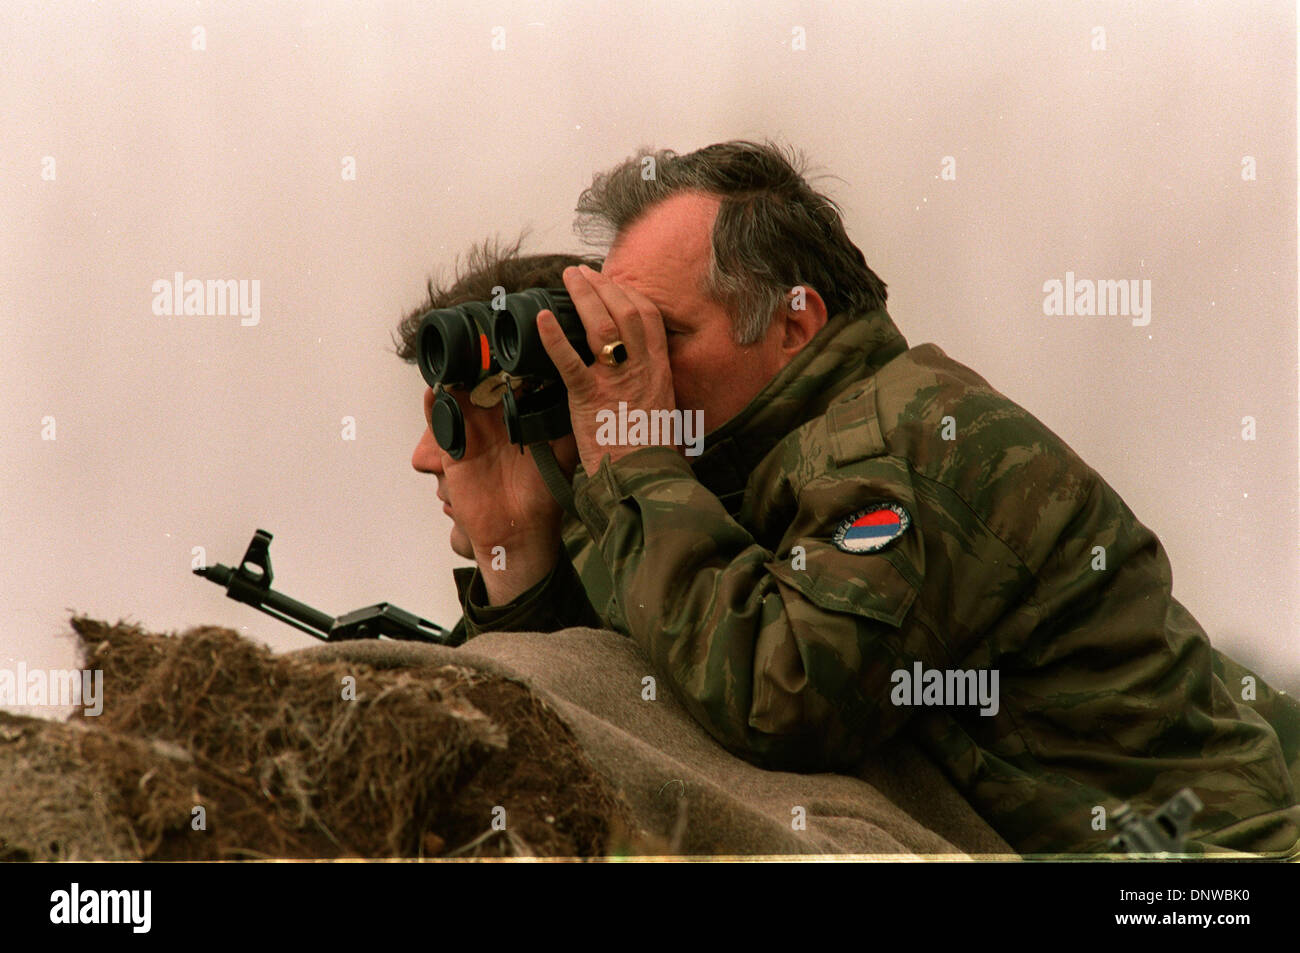 FILE PHOTO - Fugitive Bosnian Serb war crimes suspect RATKO MLADIC has been arrested in Serbia after 16 years on the run.  Mladic, 69, was found in the village of Lazarevo in northern Serbia where had been living under an assumed name. He faces charges over the massacre of at least 7,500 Bosnian Muslim men and boys at Srebrenica in 1995.  PICTURED:  Apr. 16, 1994 - Gorazde, Bosnia  Stock Photo